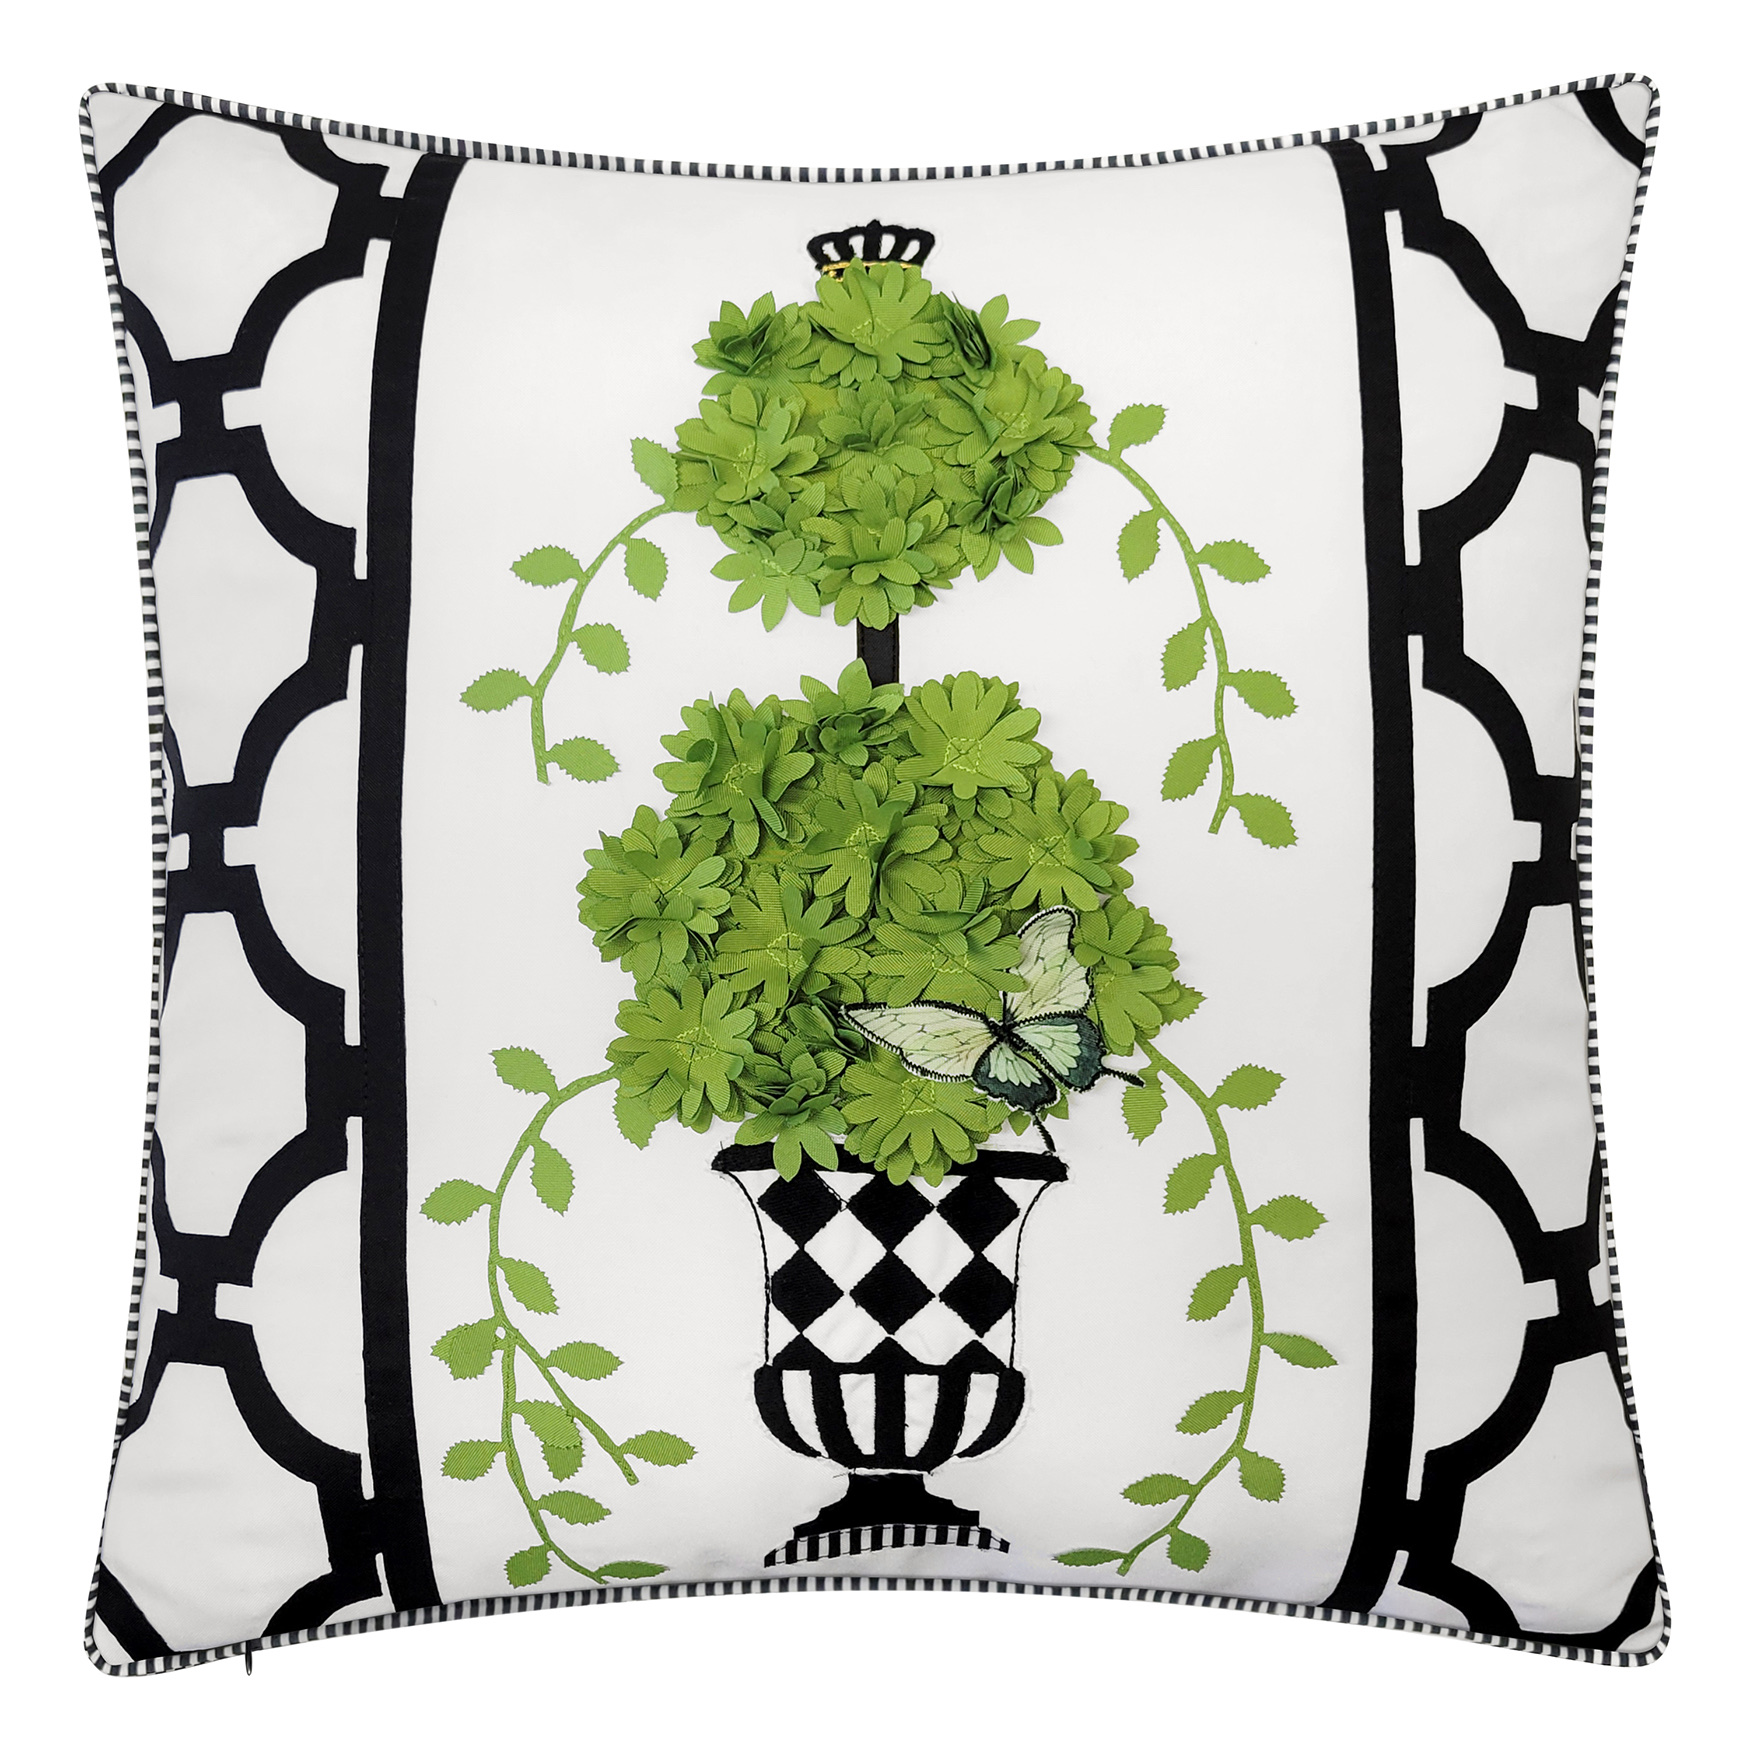 Edie @ Home Indoor/Outdoor Crowned Dimensional Topiary Decorative